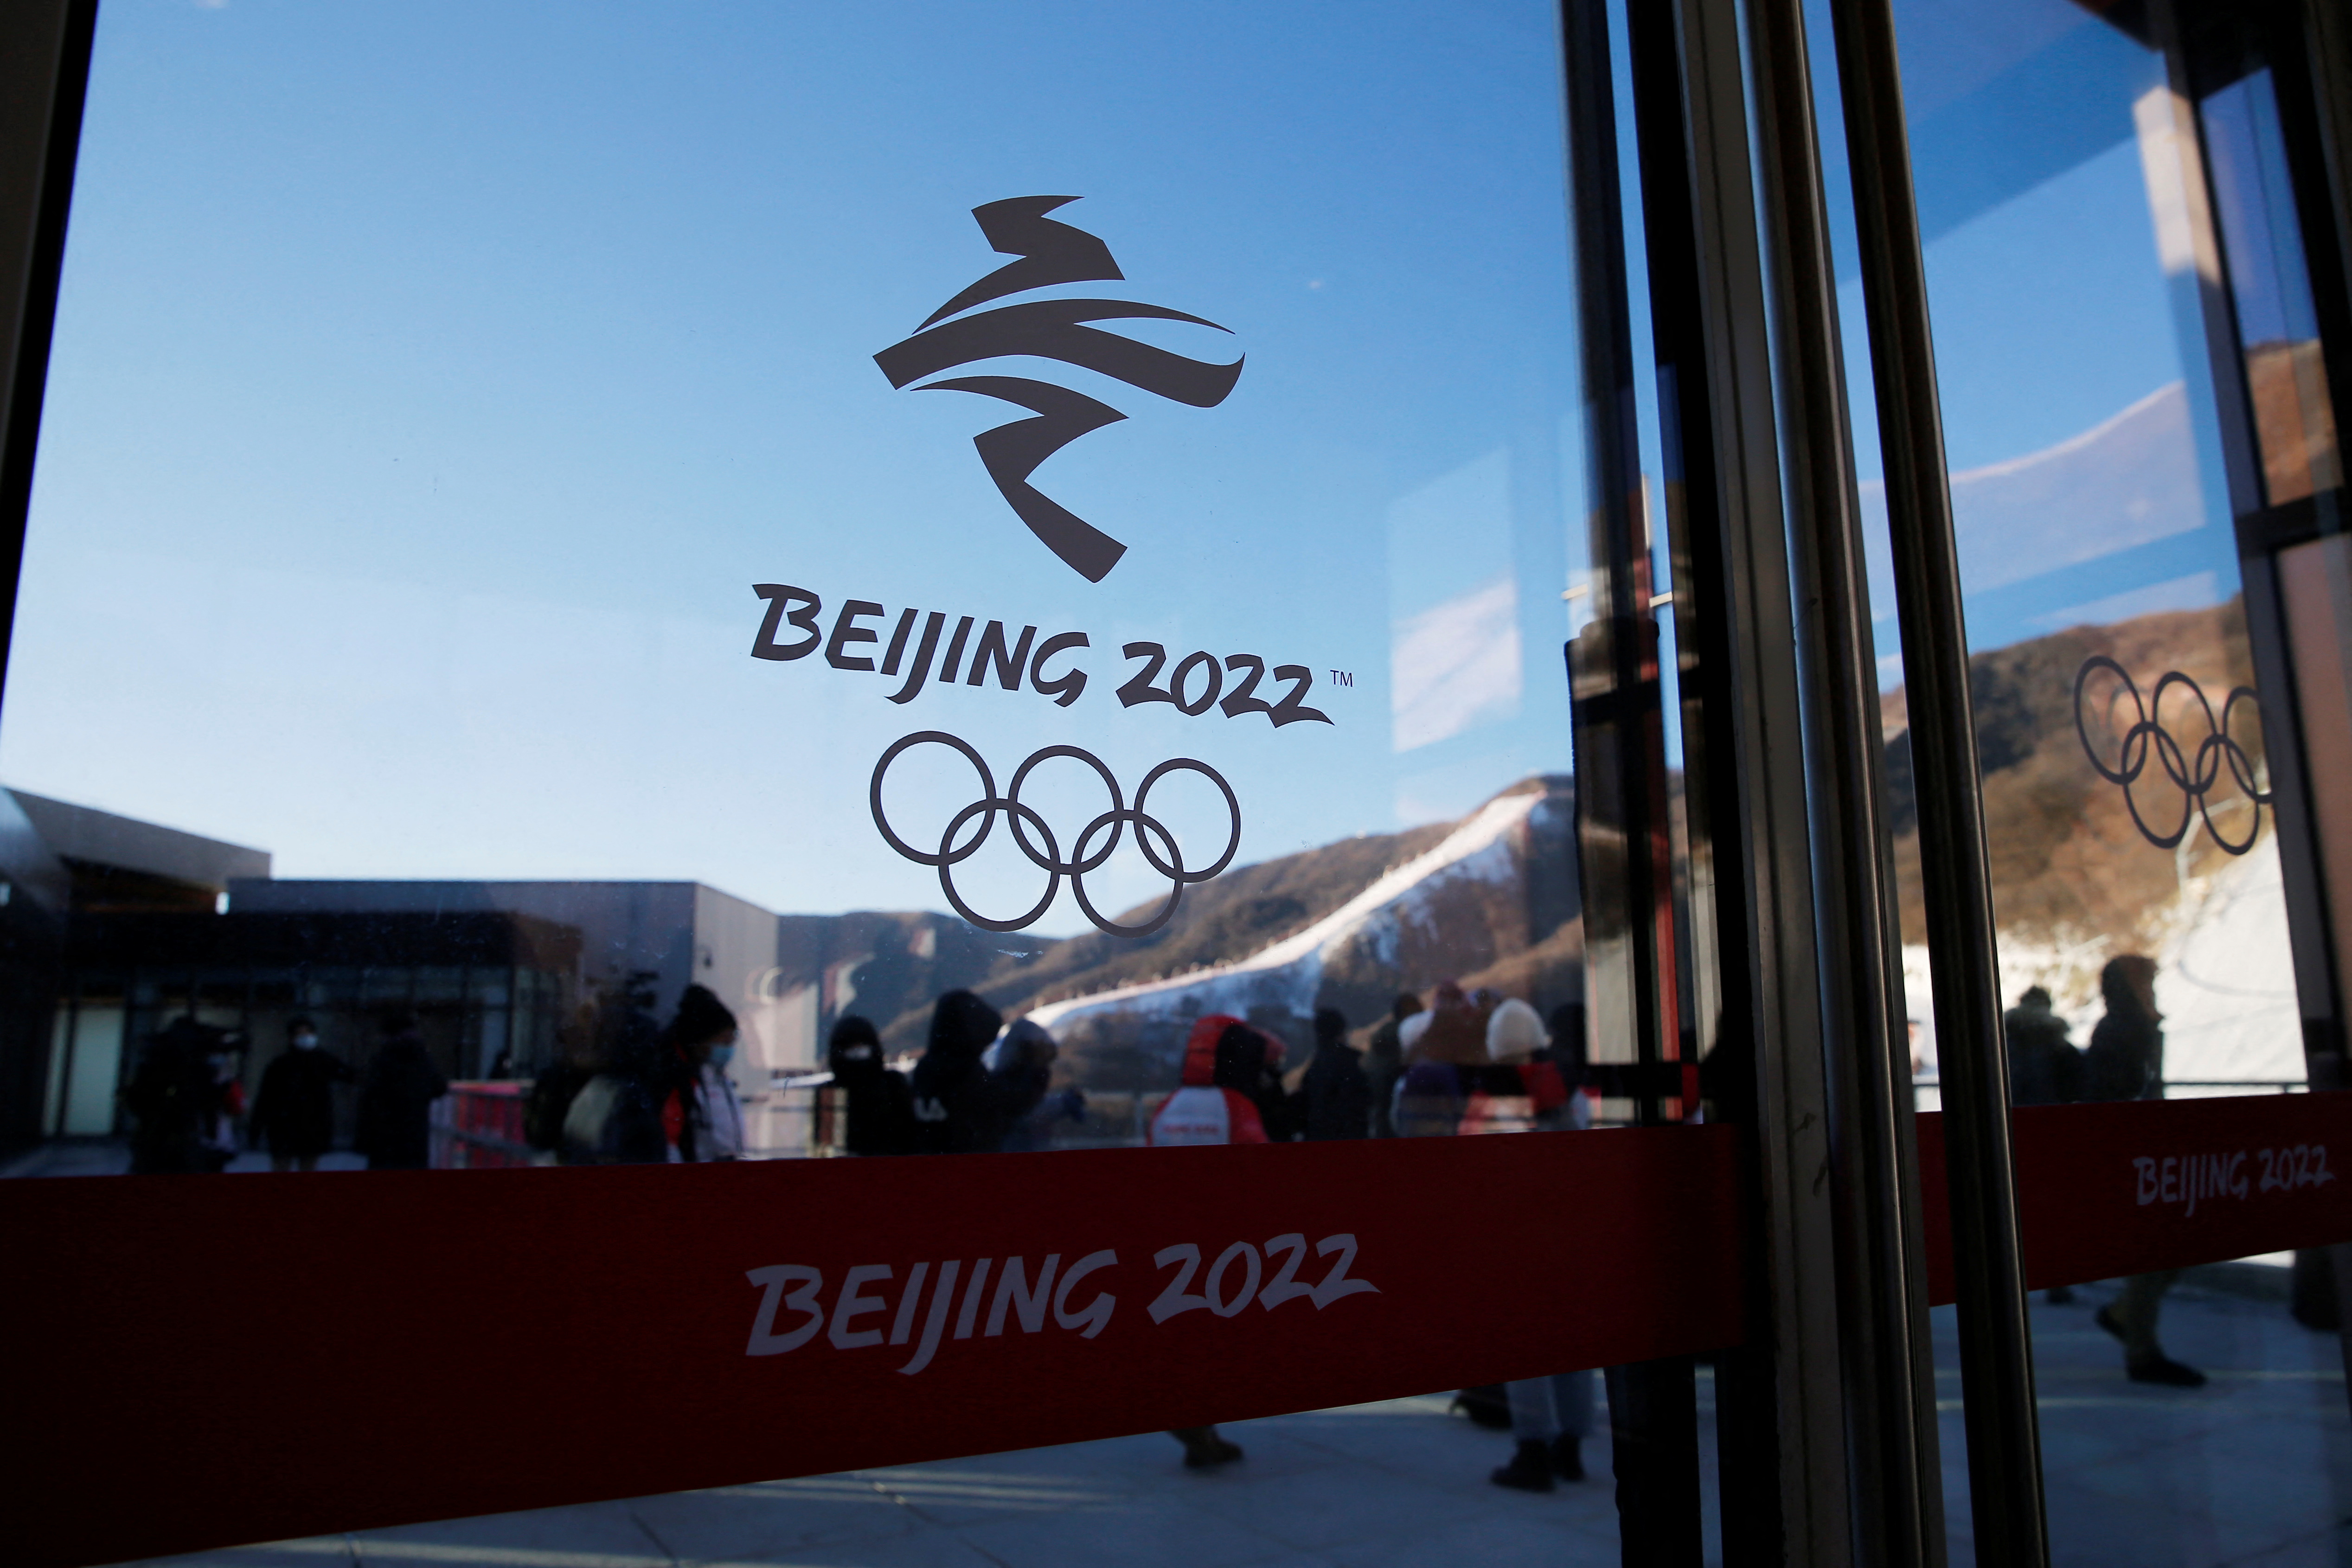 The Hula Report: Milestones in 2022 for Olympics, World Sport